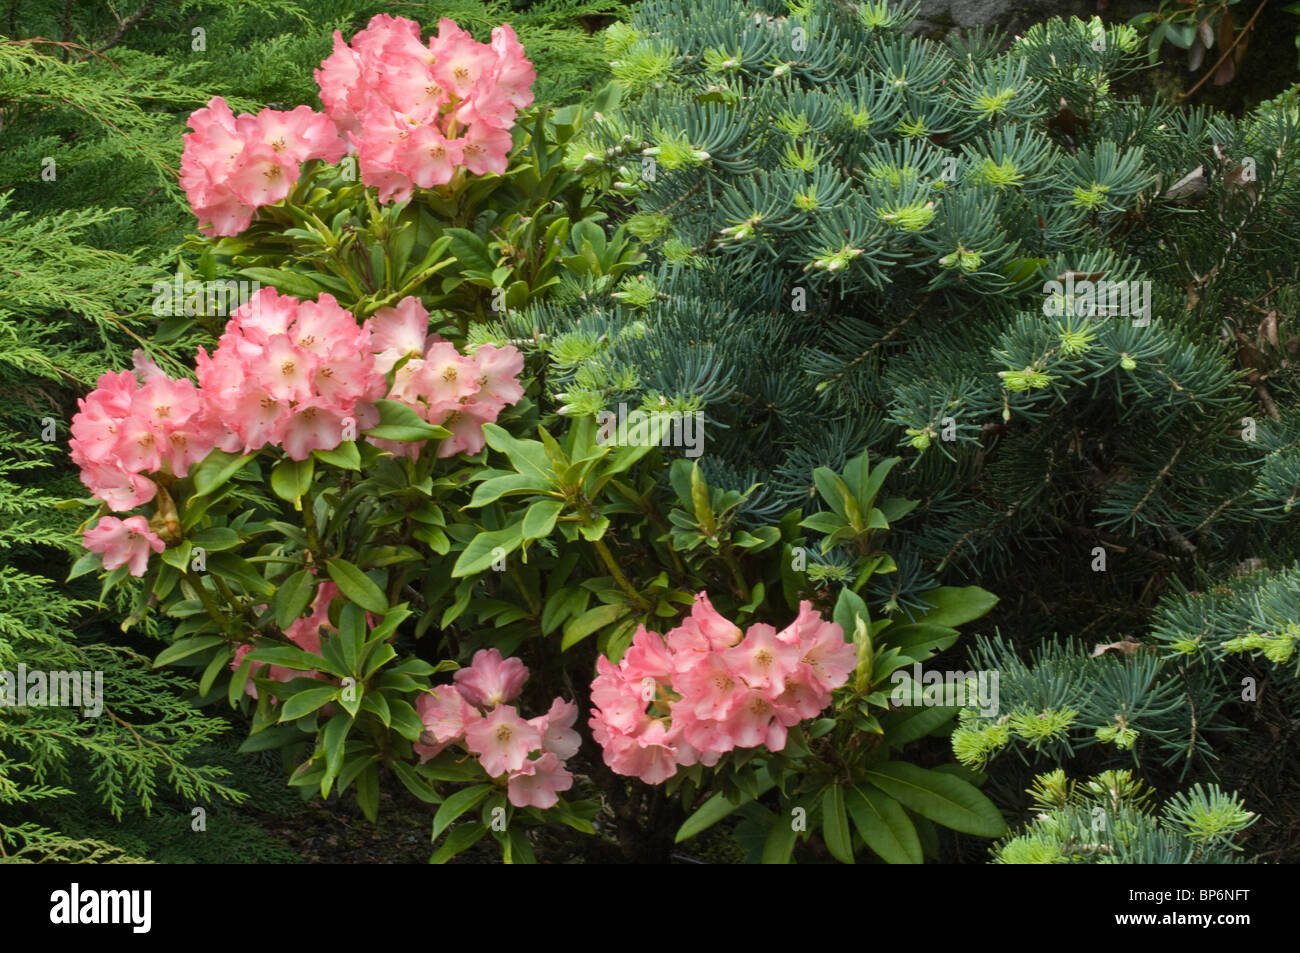 Rhododendron flowers in garden design by Bahaa Seedhom North Yorkshire England May Stock Photo